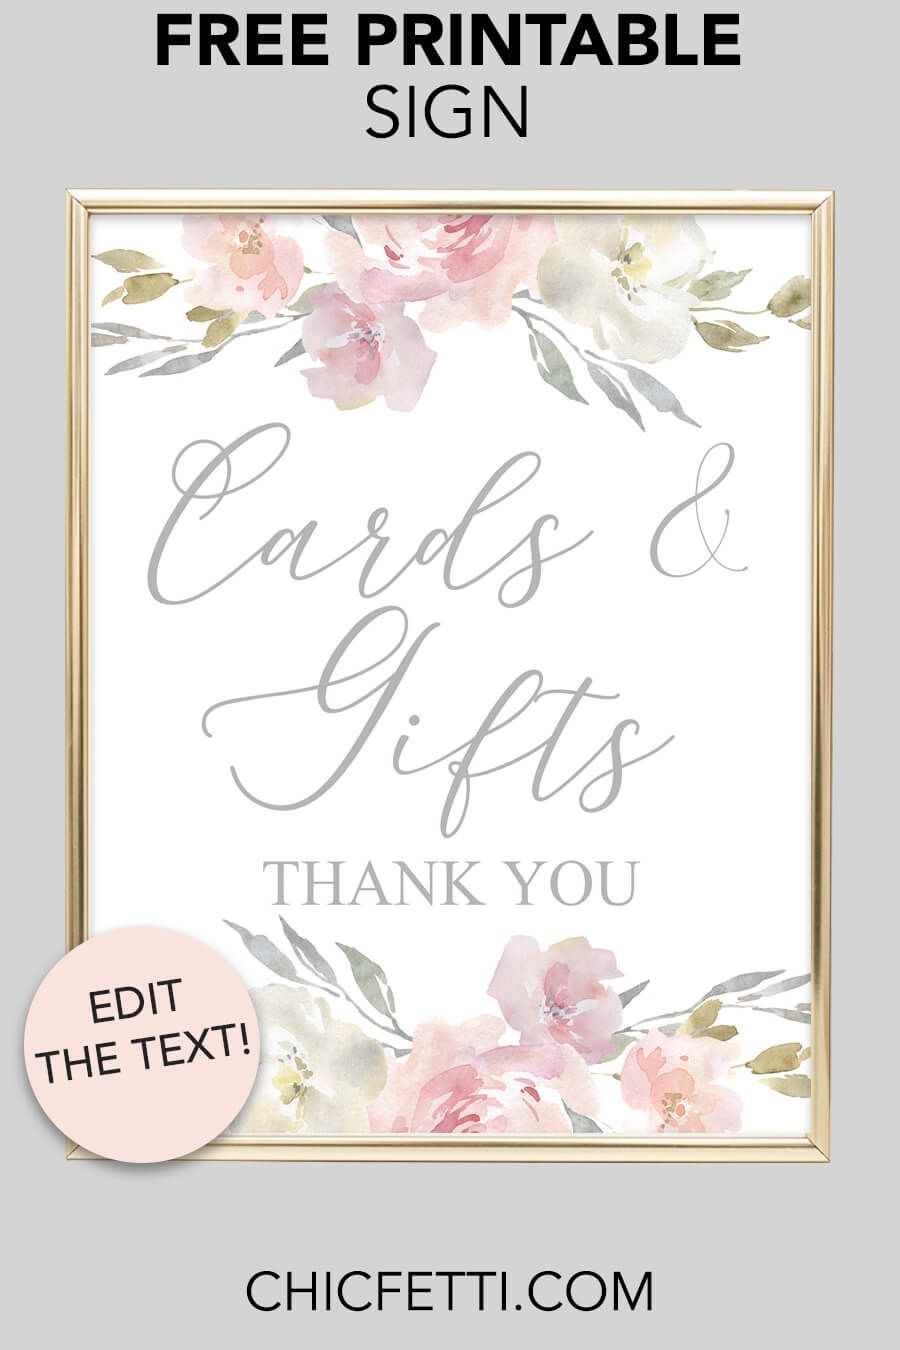 Cards &amp;amp; Gifts Printable Sign (Blush Floral | Free Printables | Free - Cards Sign Free Printable